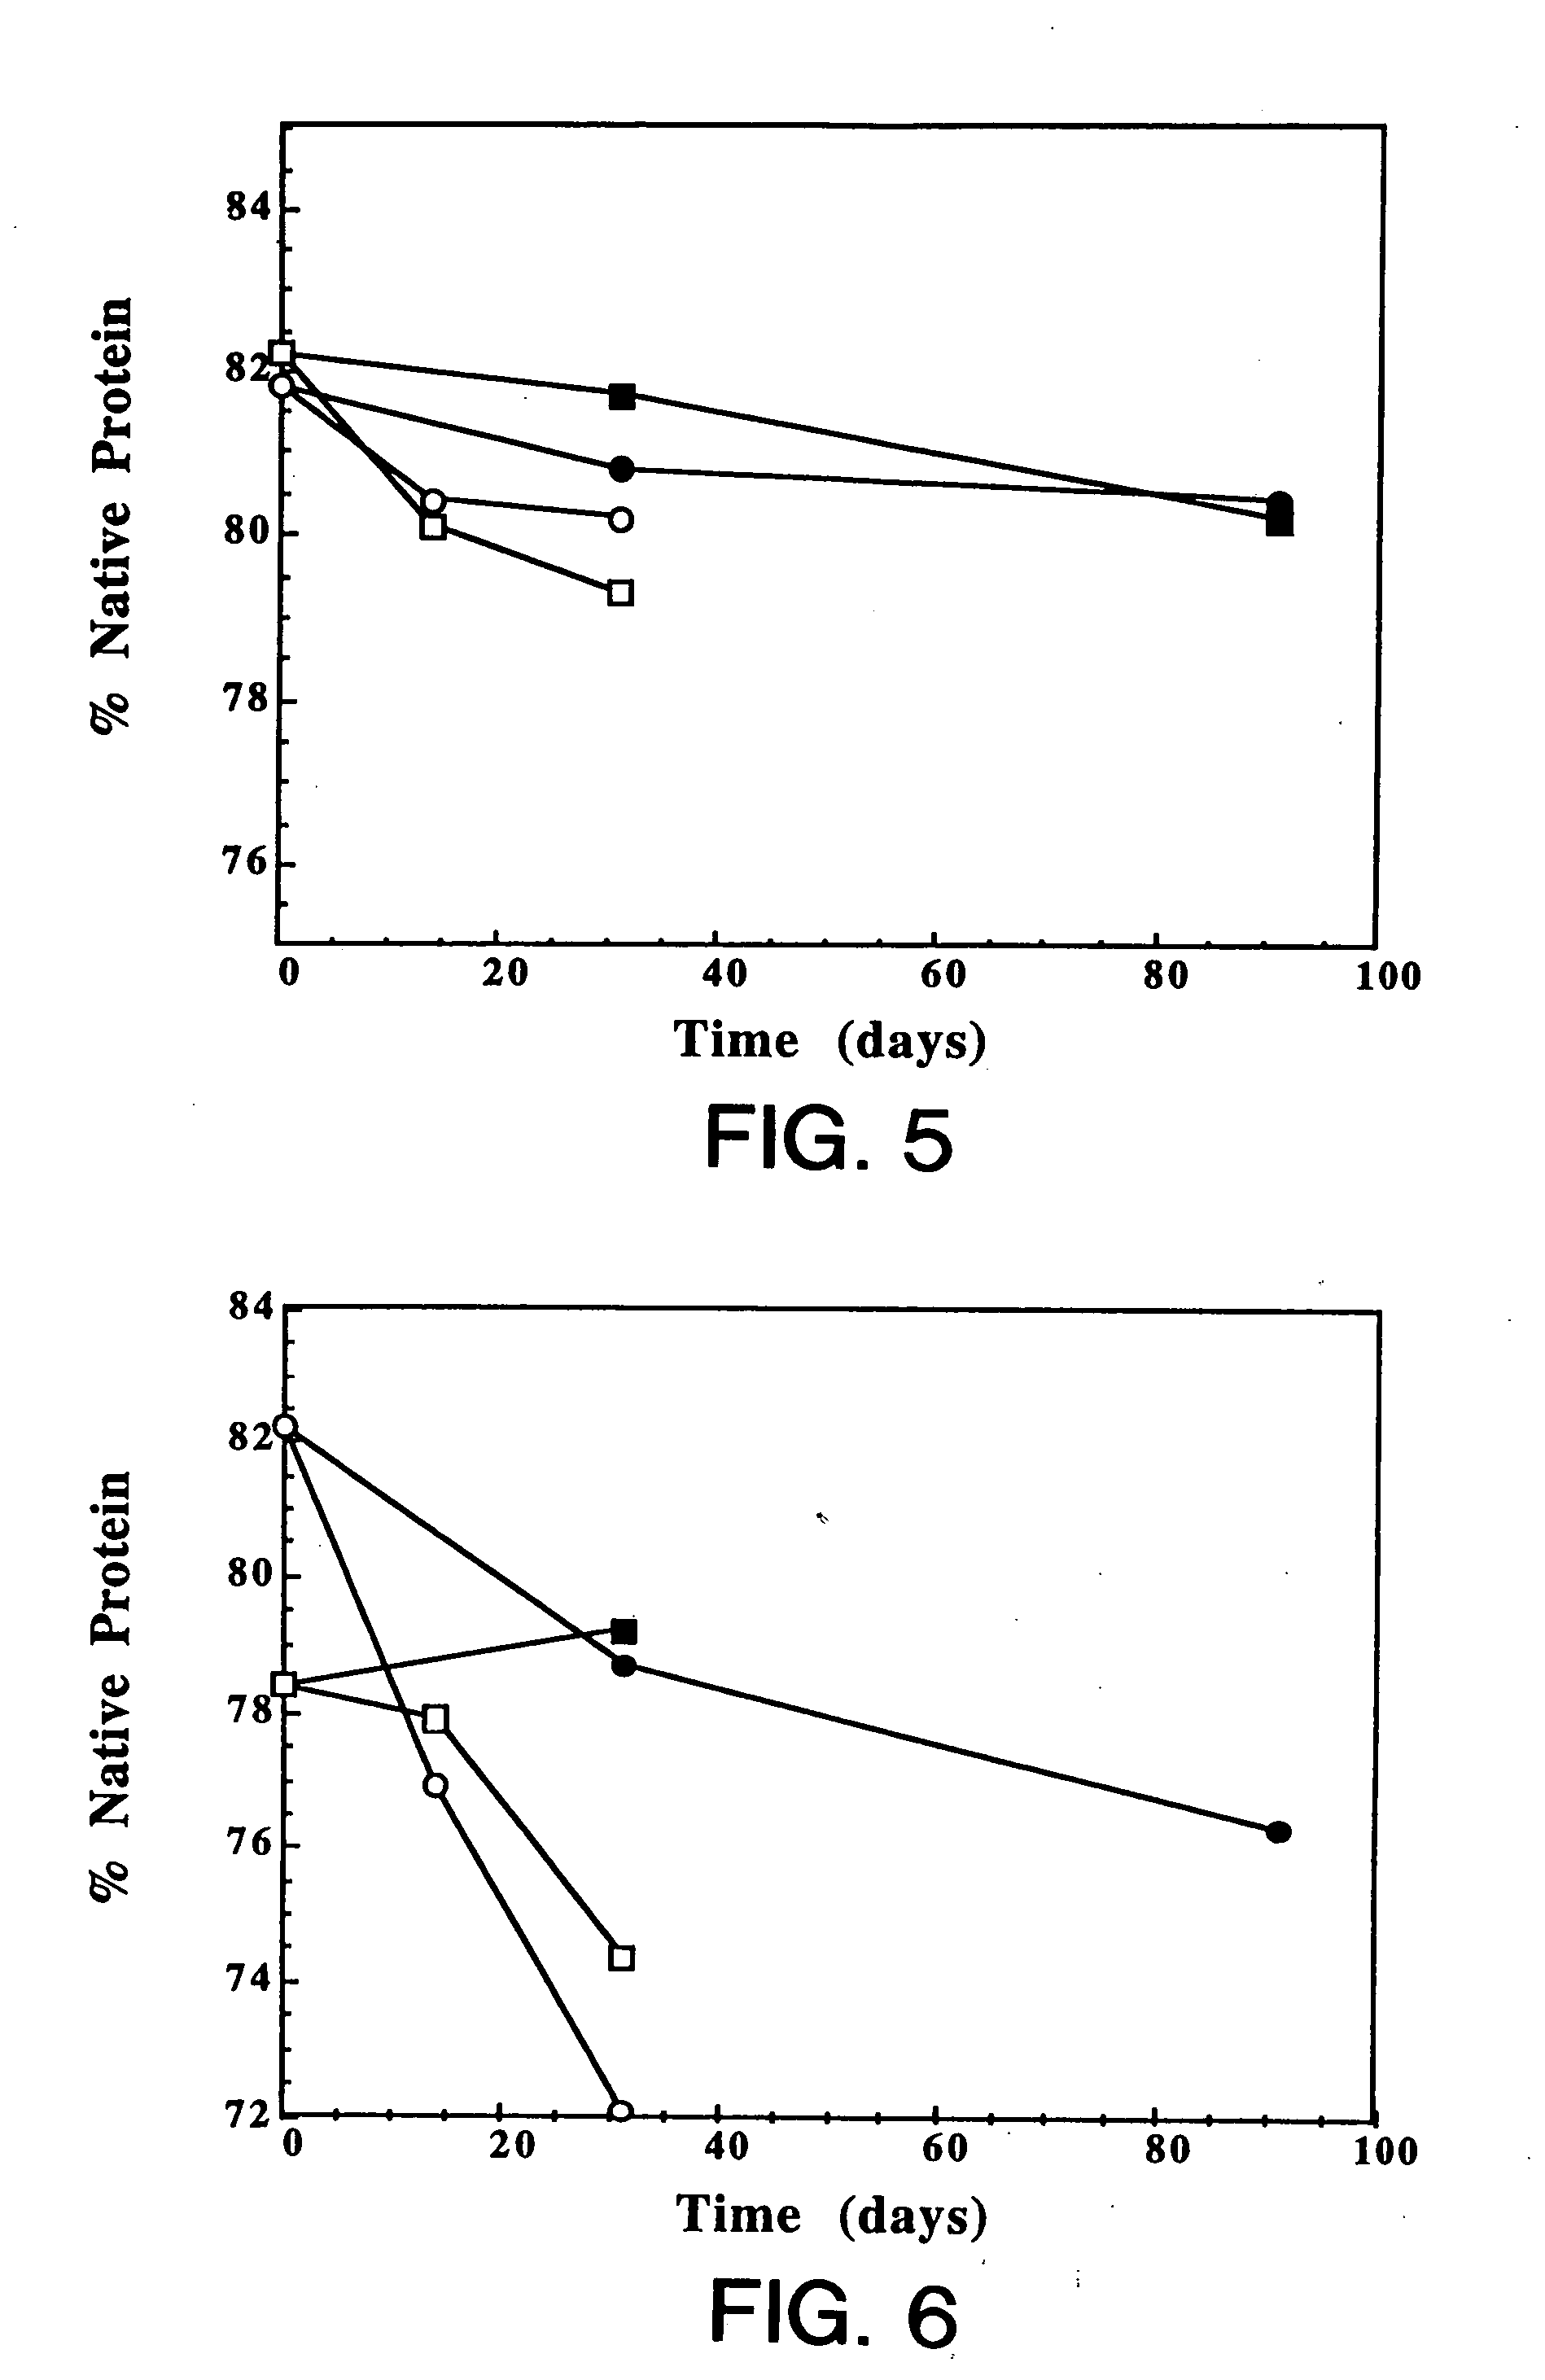 Treating a mammal with a formulation comprising an antibody which binds IgE